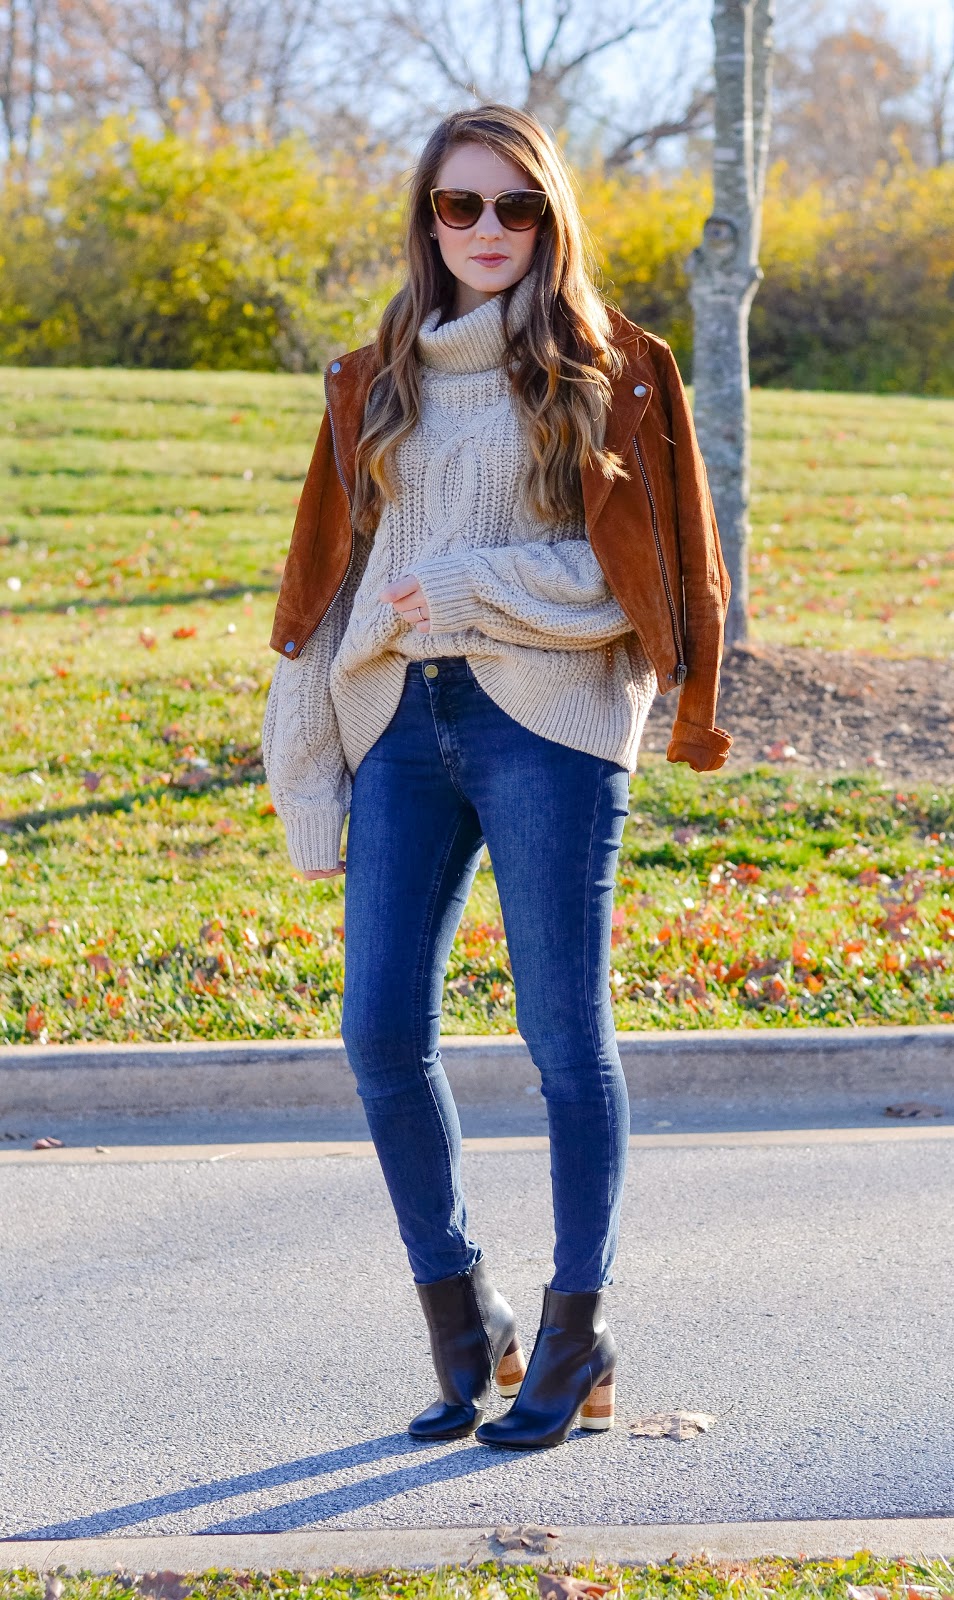 Sincerely Jenna Marie | A St. Louis Life and Style Blog: Suede & Cozy ...